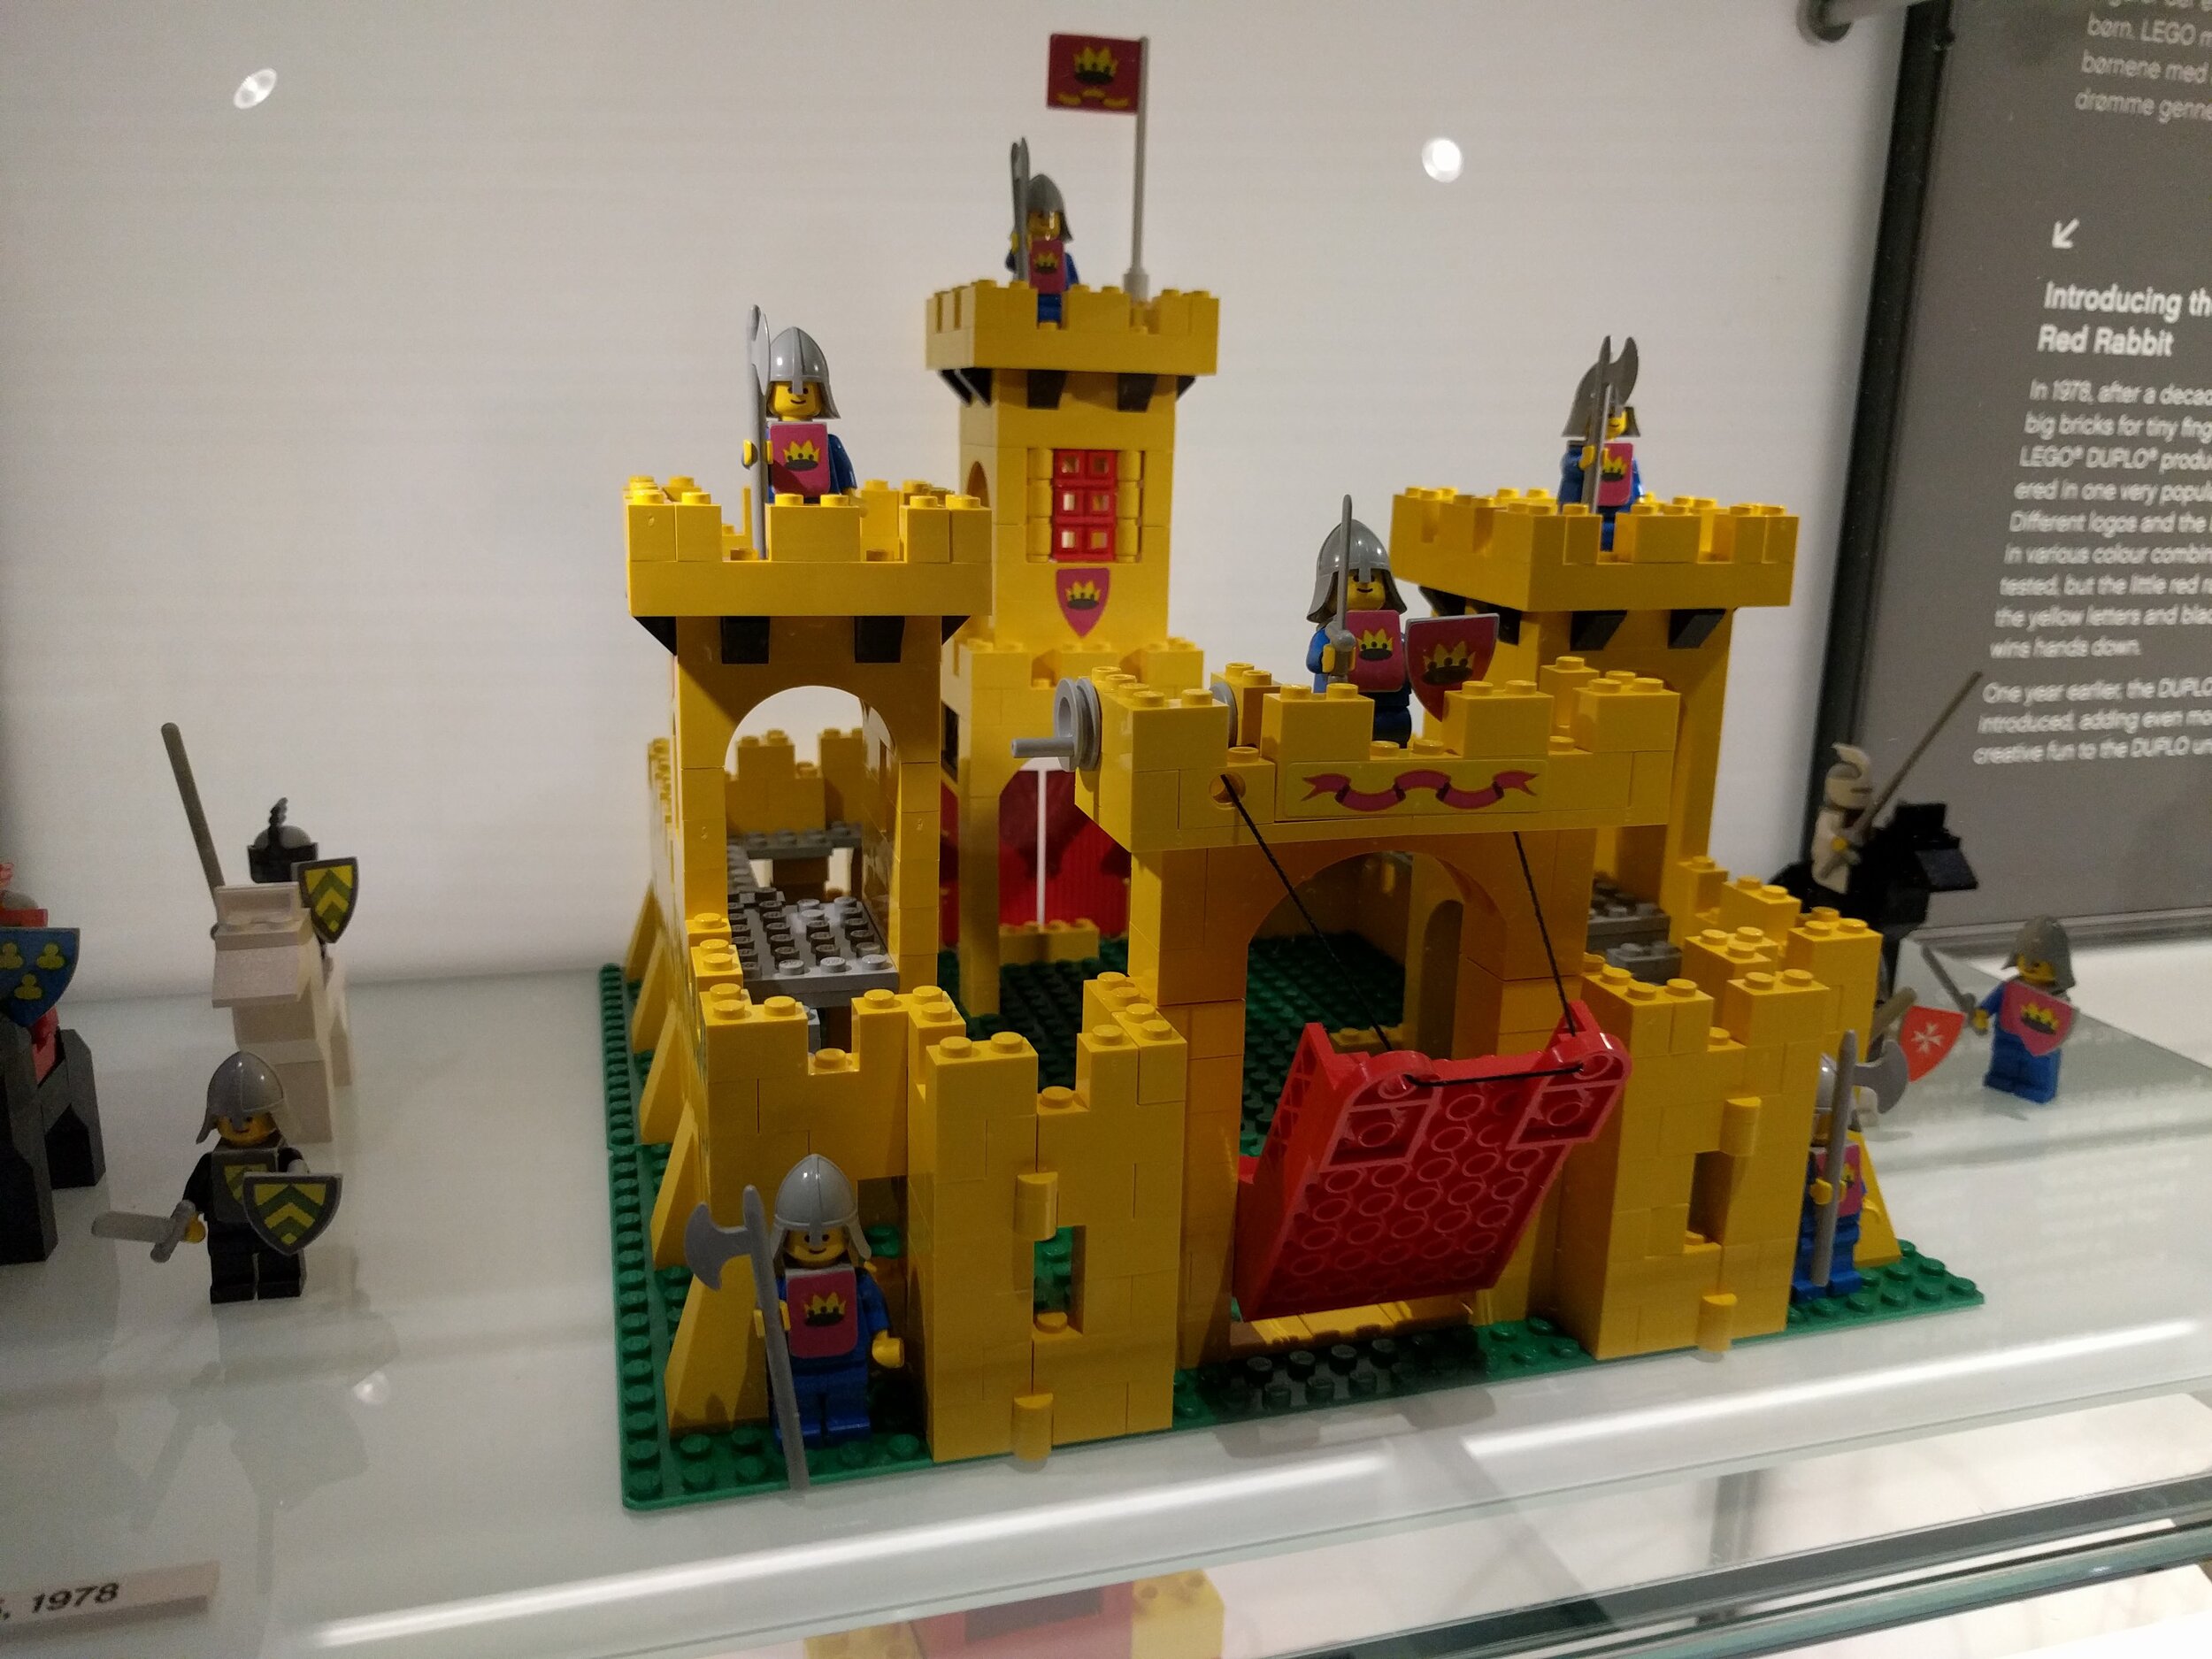 The Yellow Castle